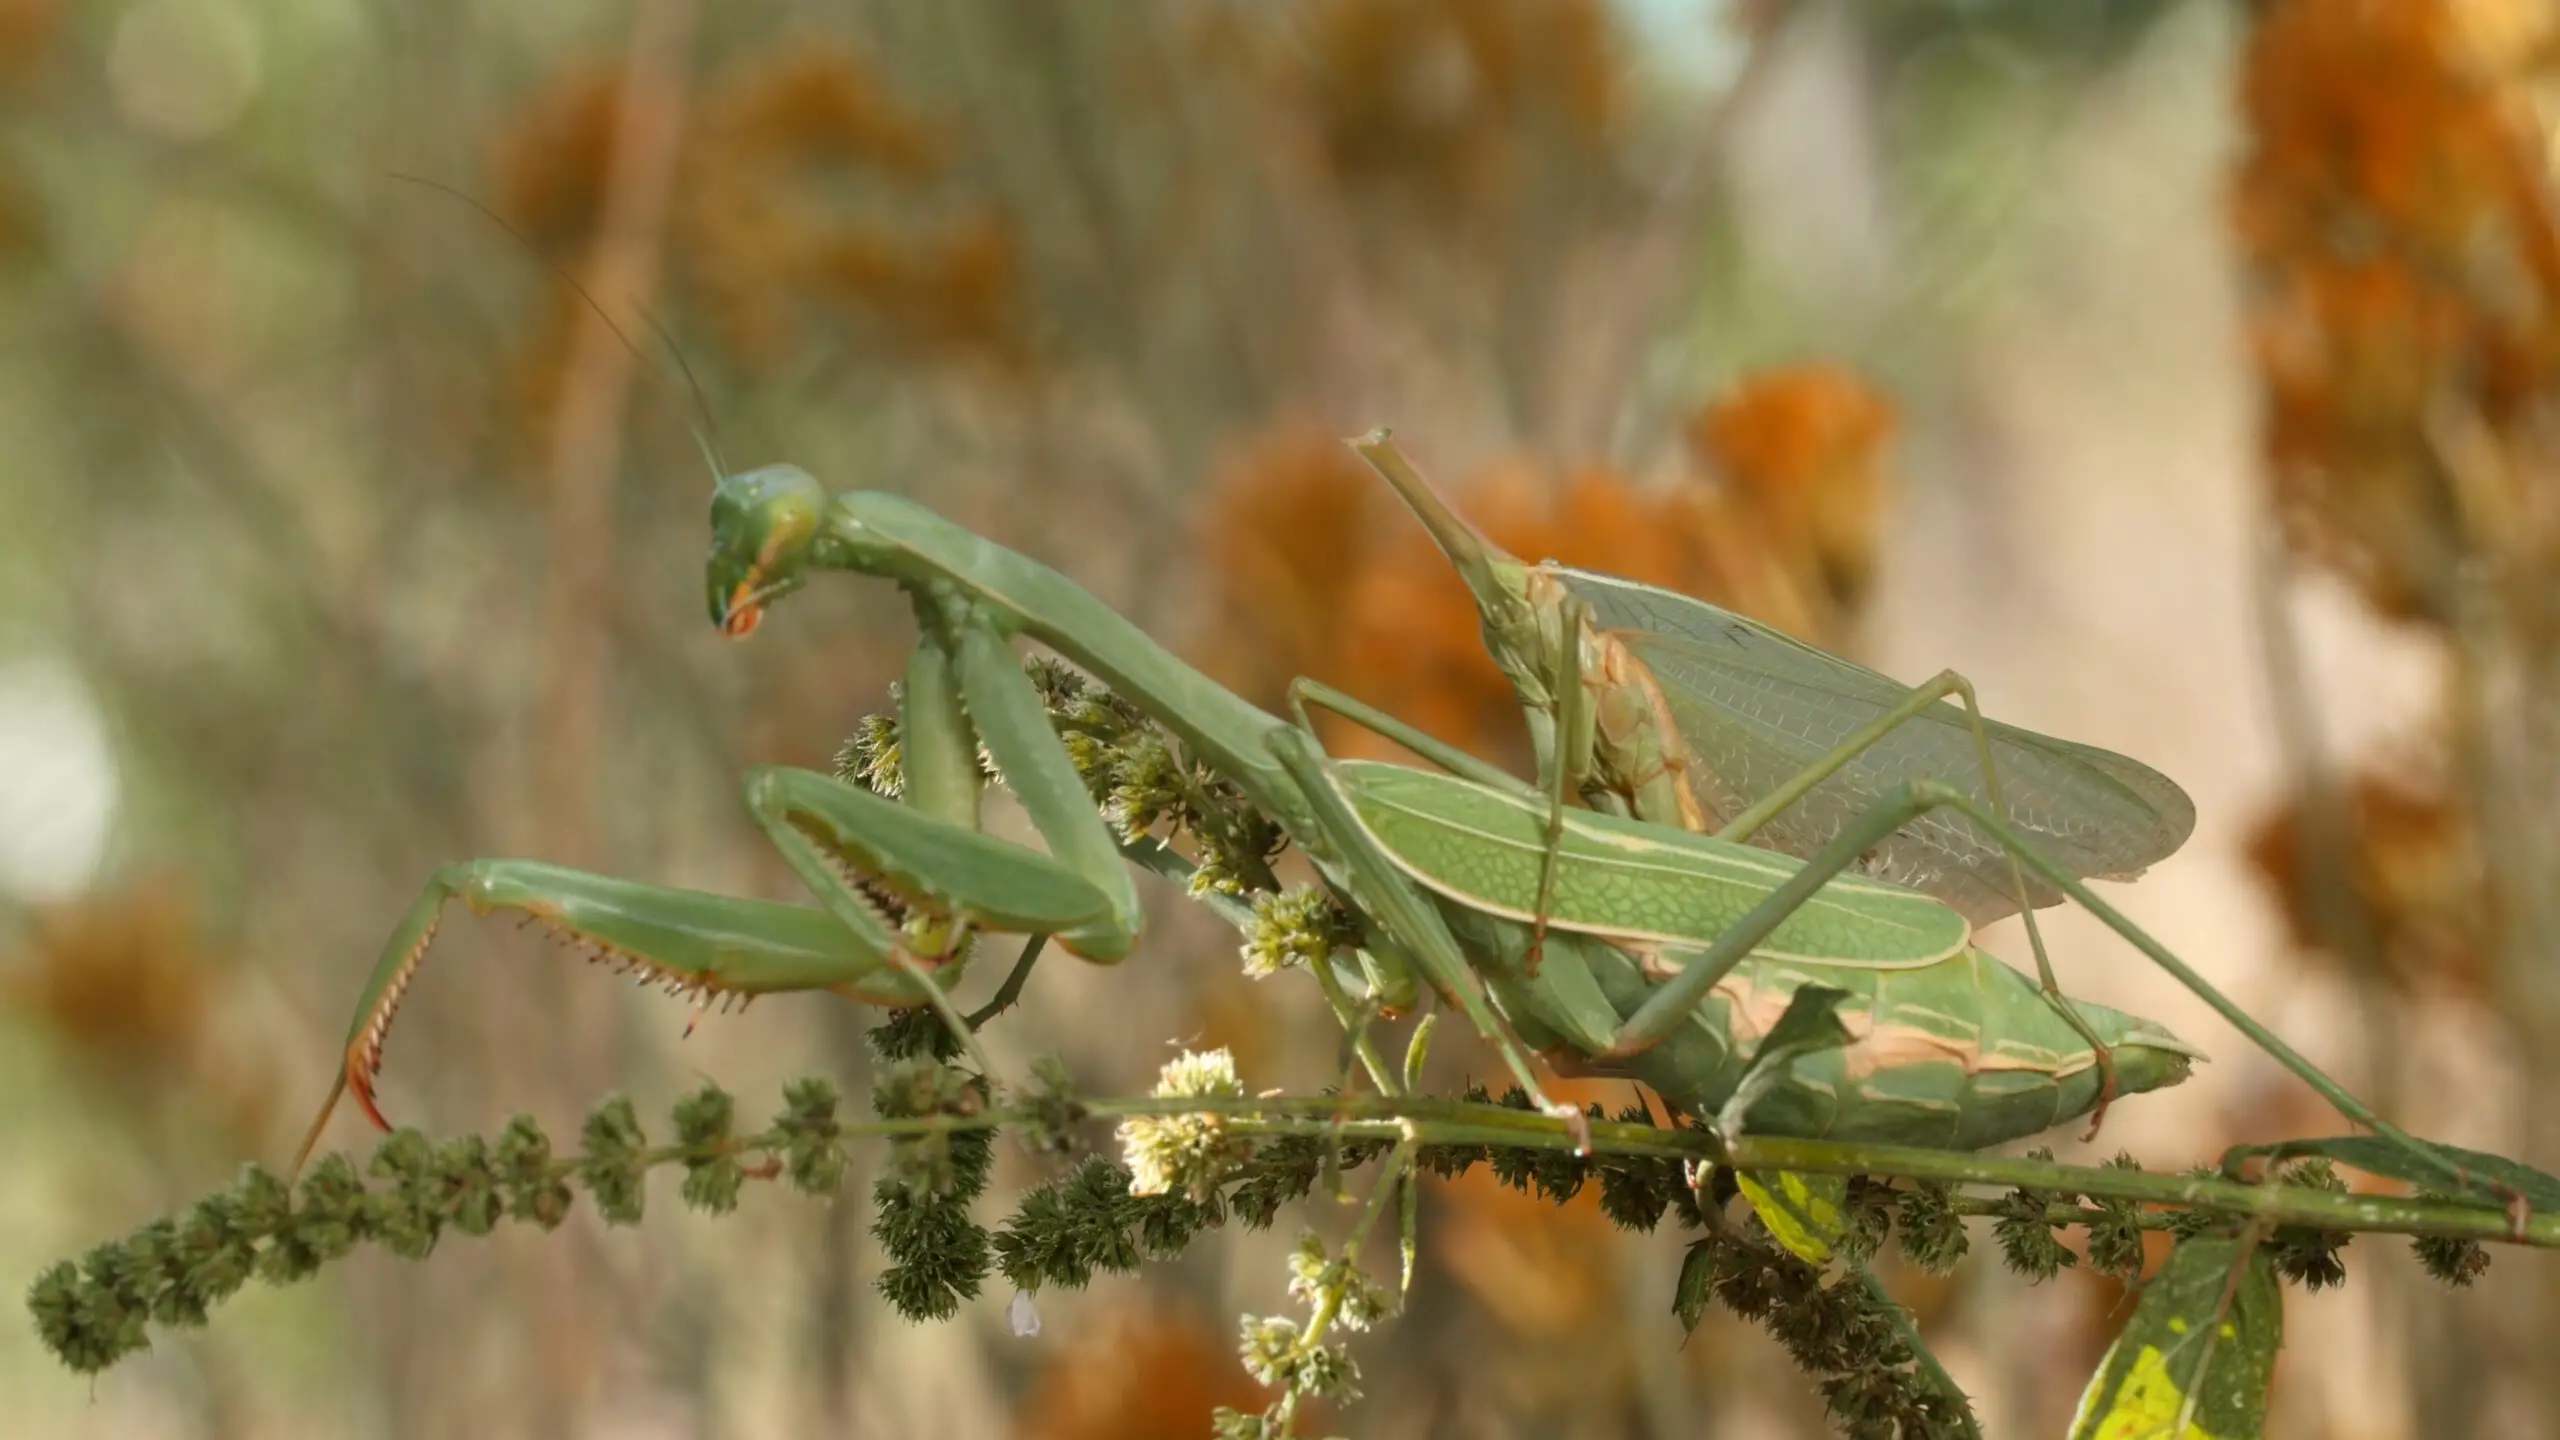 Difference between Male and Female Praying Mantis